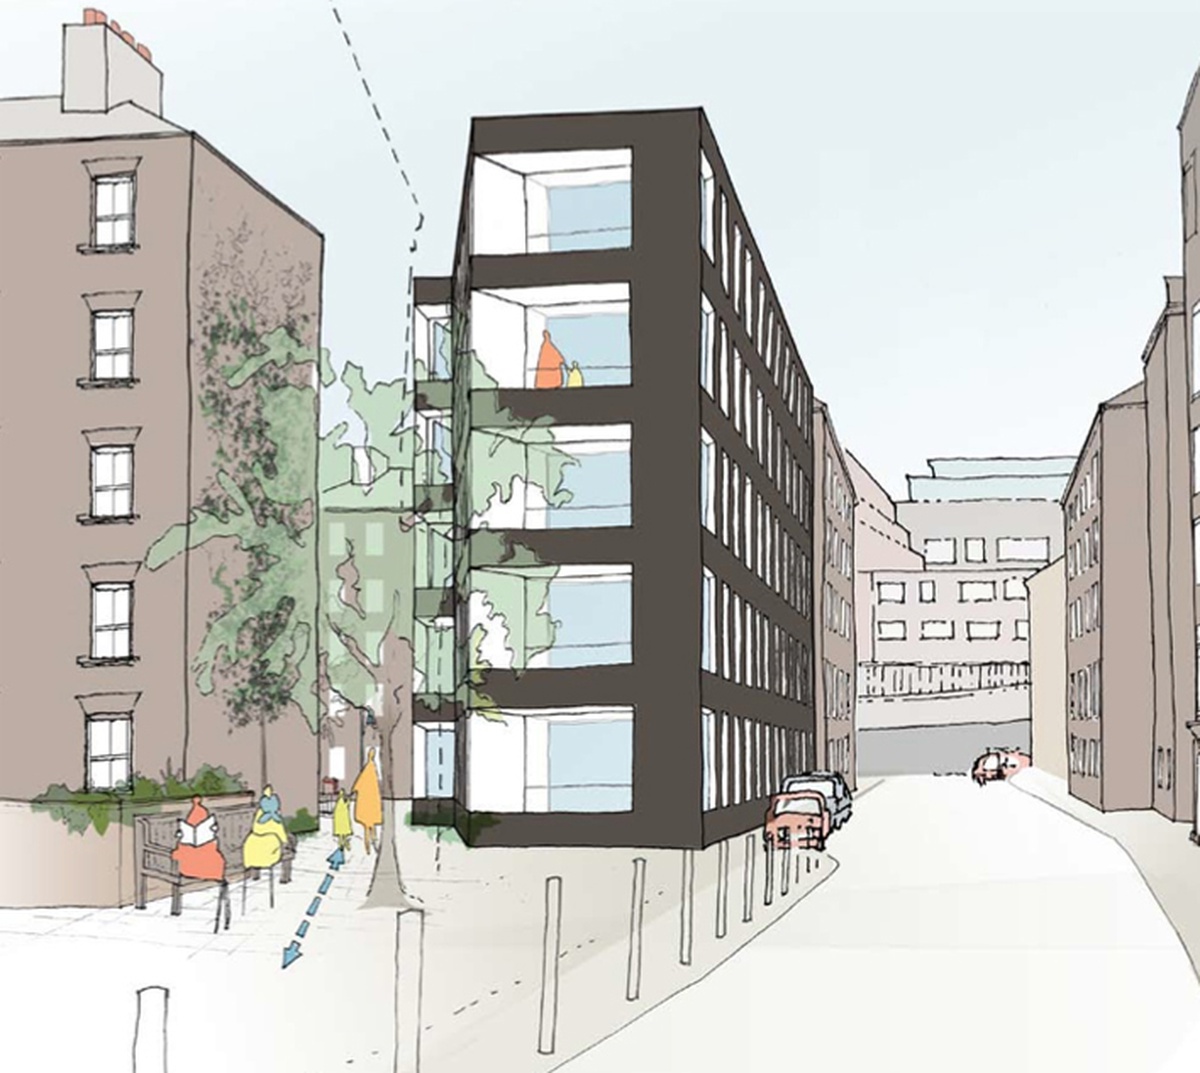 Planning Permission Granted for Peabody Housing